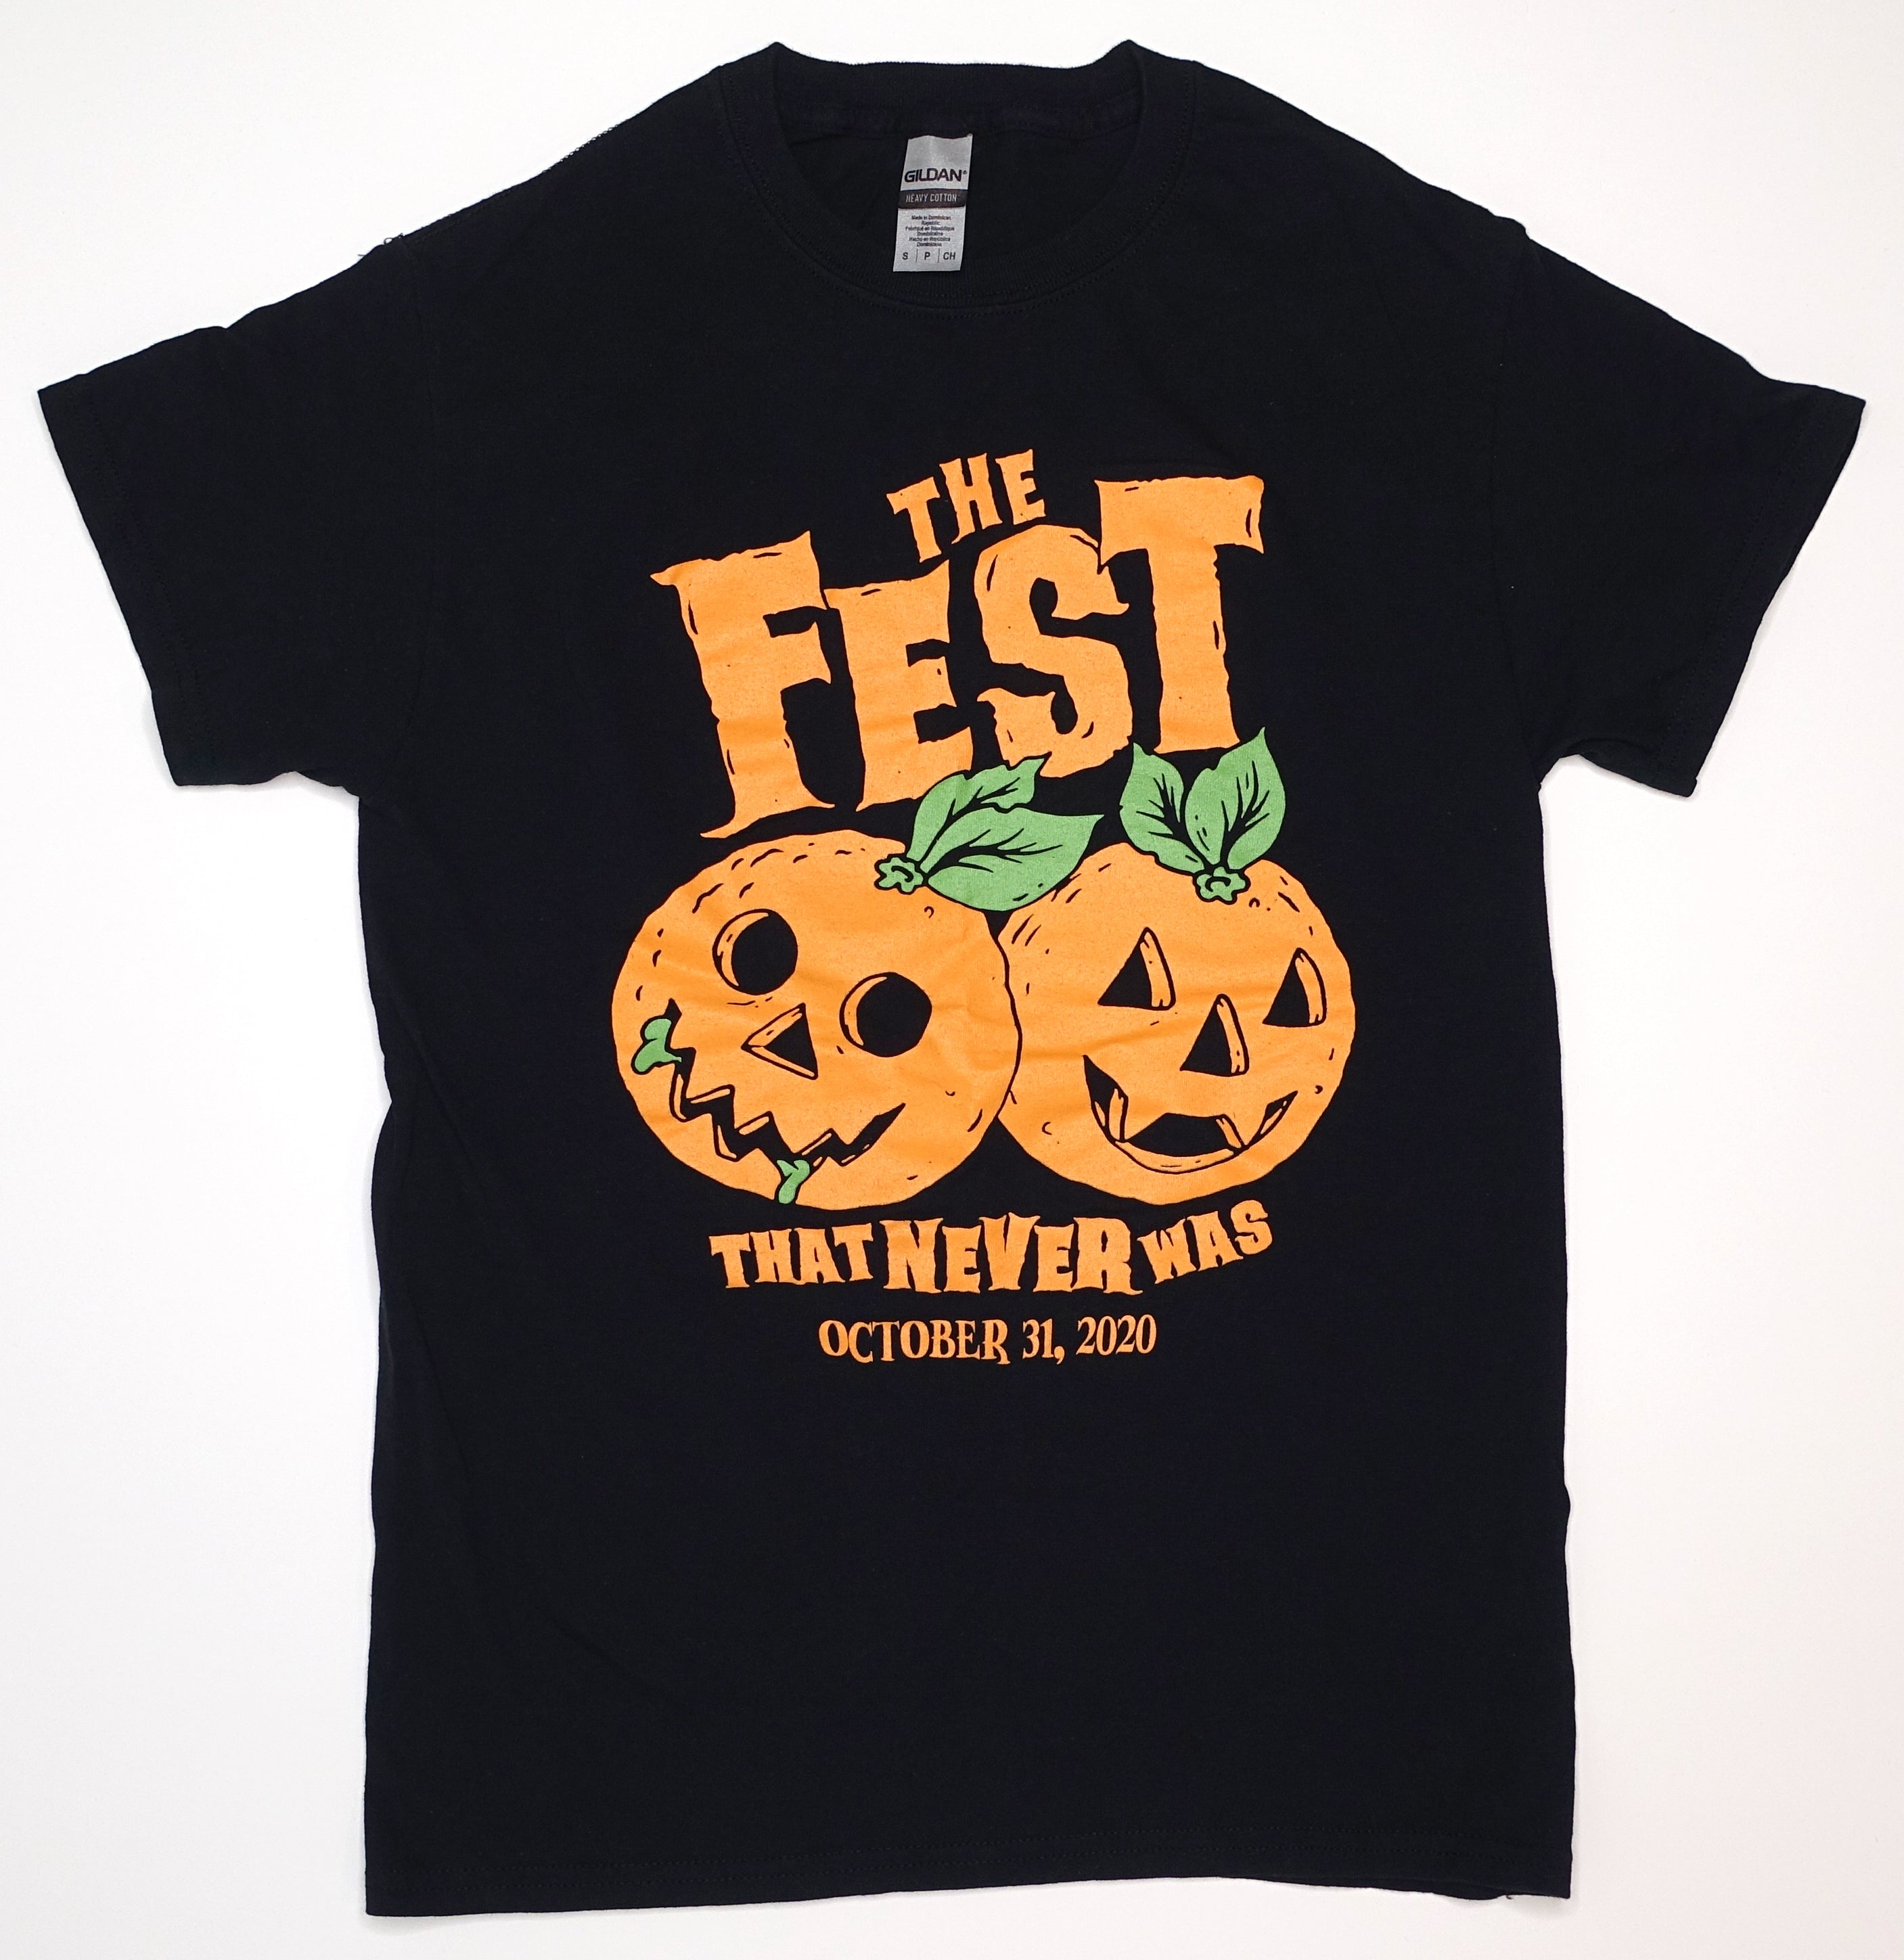 The Fest - The Fest That never Was 2020 Shirt Size Small